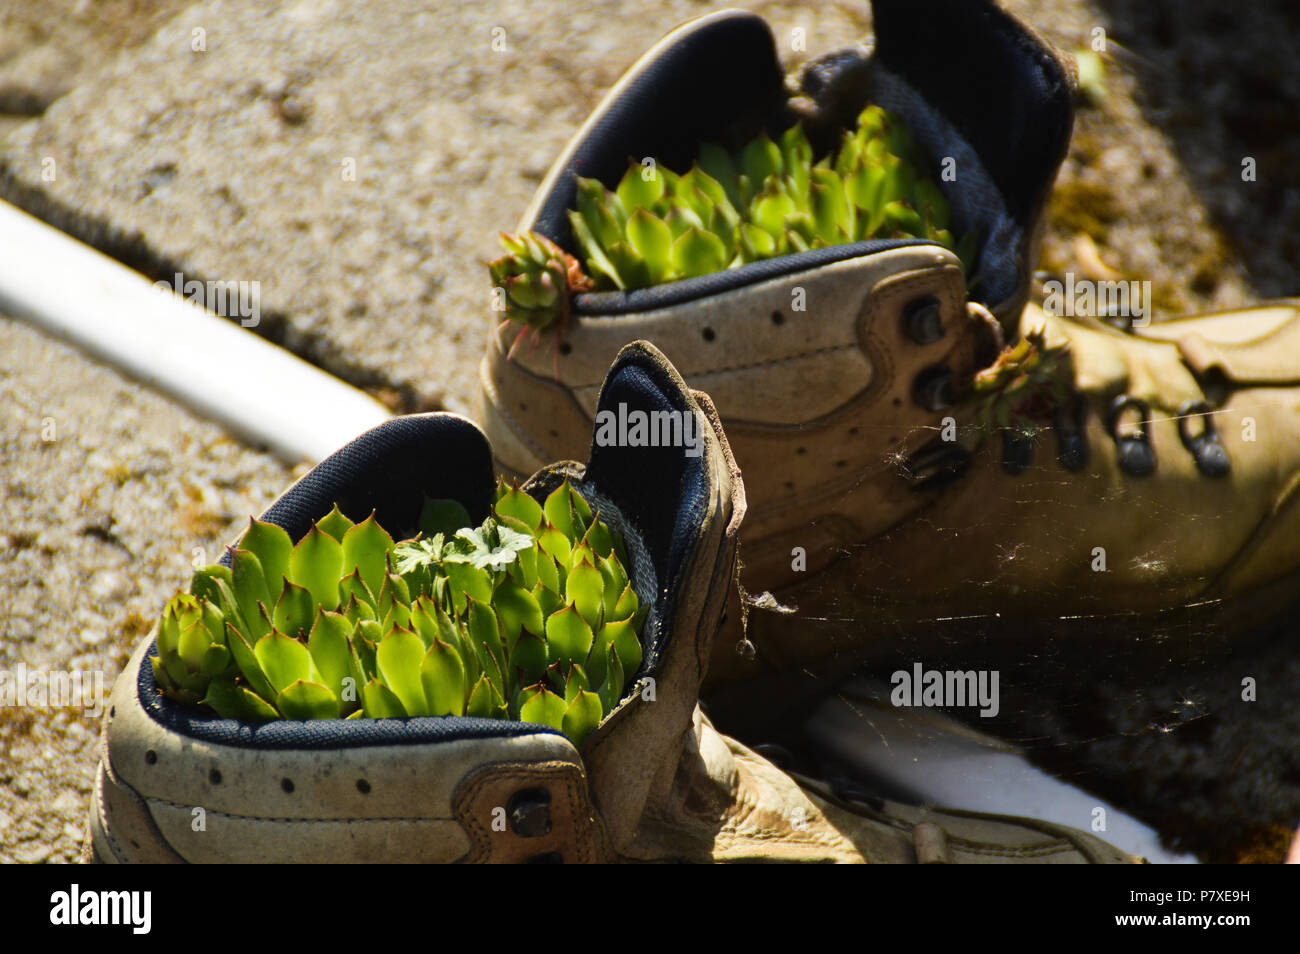 An old pair of hiking boots being use as a pot for succulents, showing the beauty and simplicity of an eco-friendly sustainable lifestyle Stock Photo